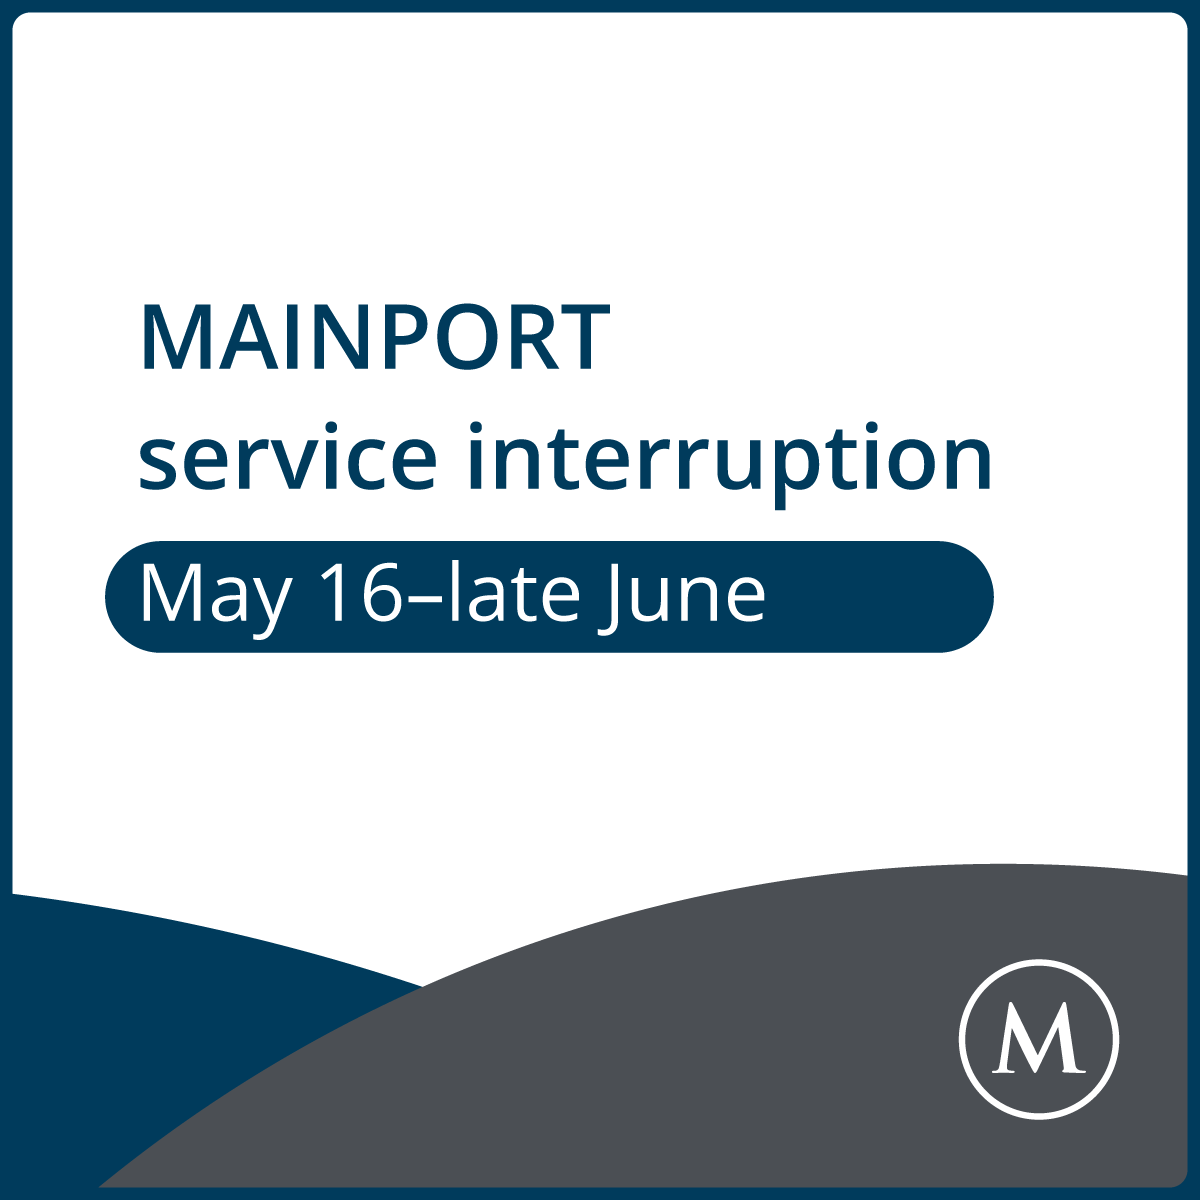 MAINPORT service interruption May 16 to mid June